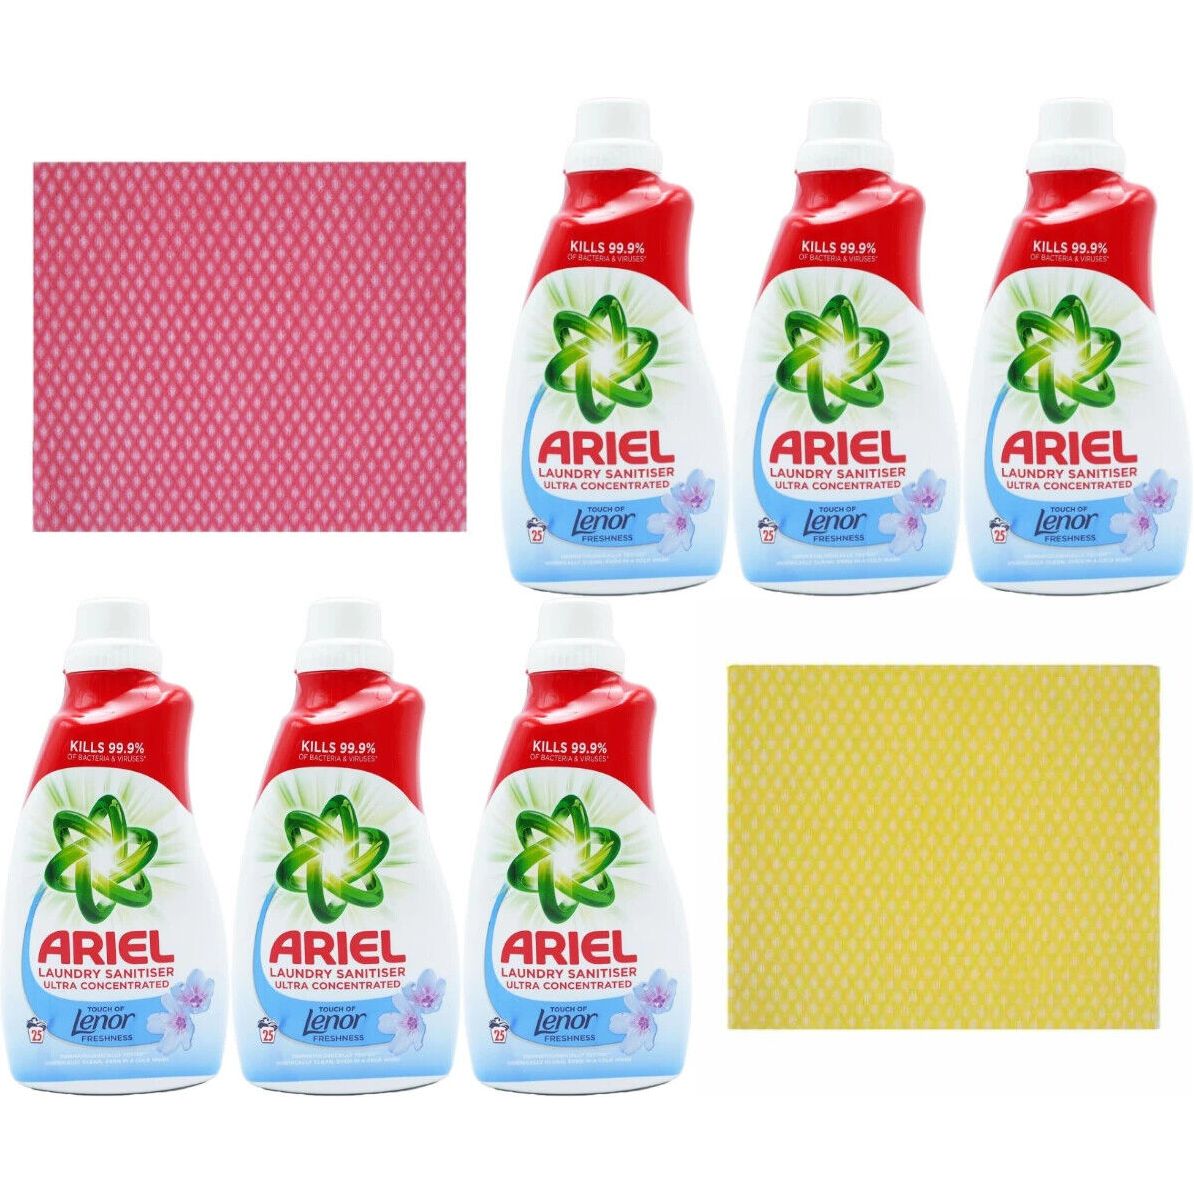 6 x Ariel Laundry Sanitiser Concentrated,25 W-1L-Lenor Freshness+Cleaning Cloth